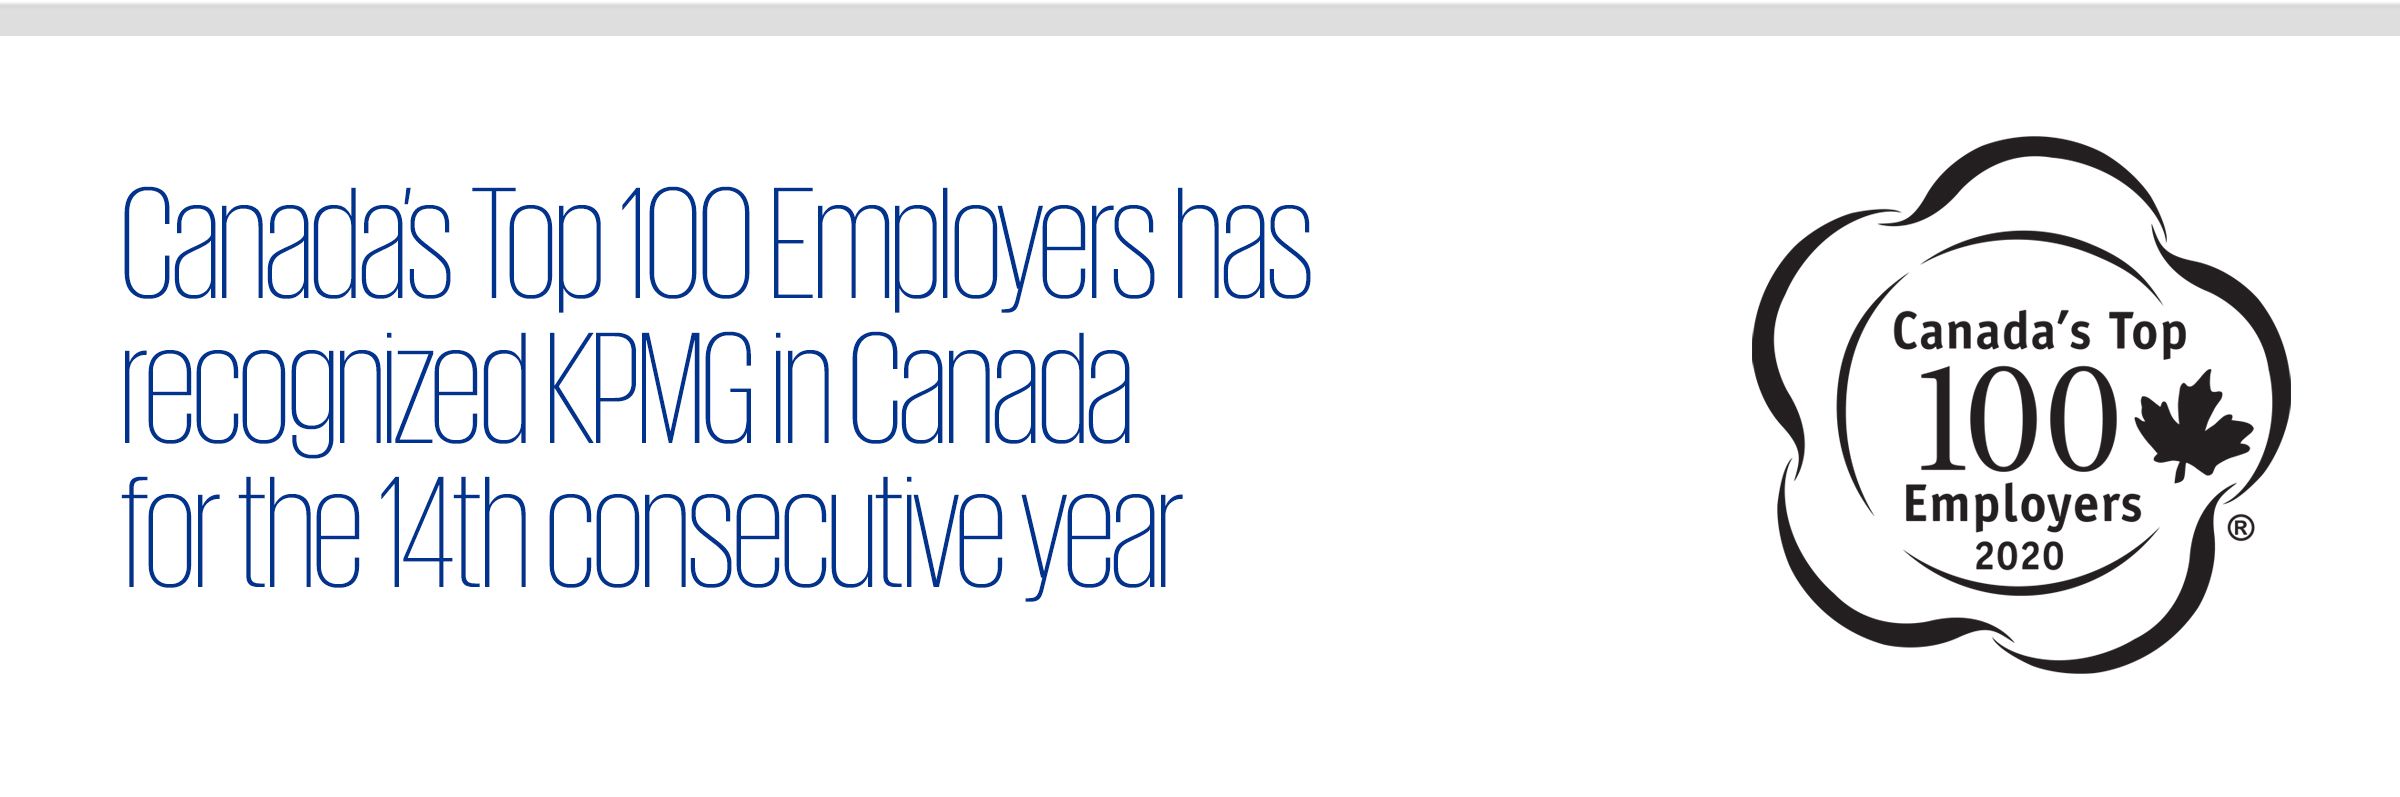 Canada’s Top 100 Employers has recognized KPMG in Canada for the 14th consecutive year